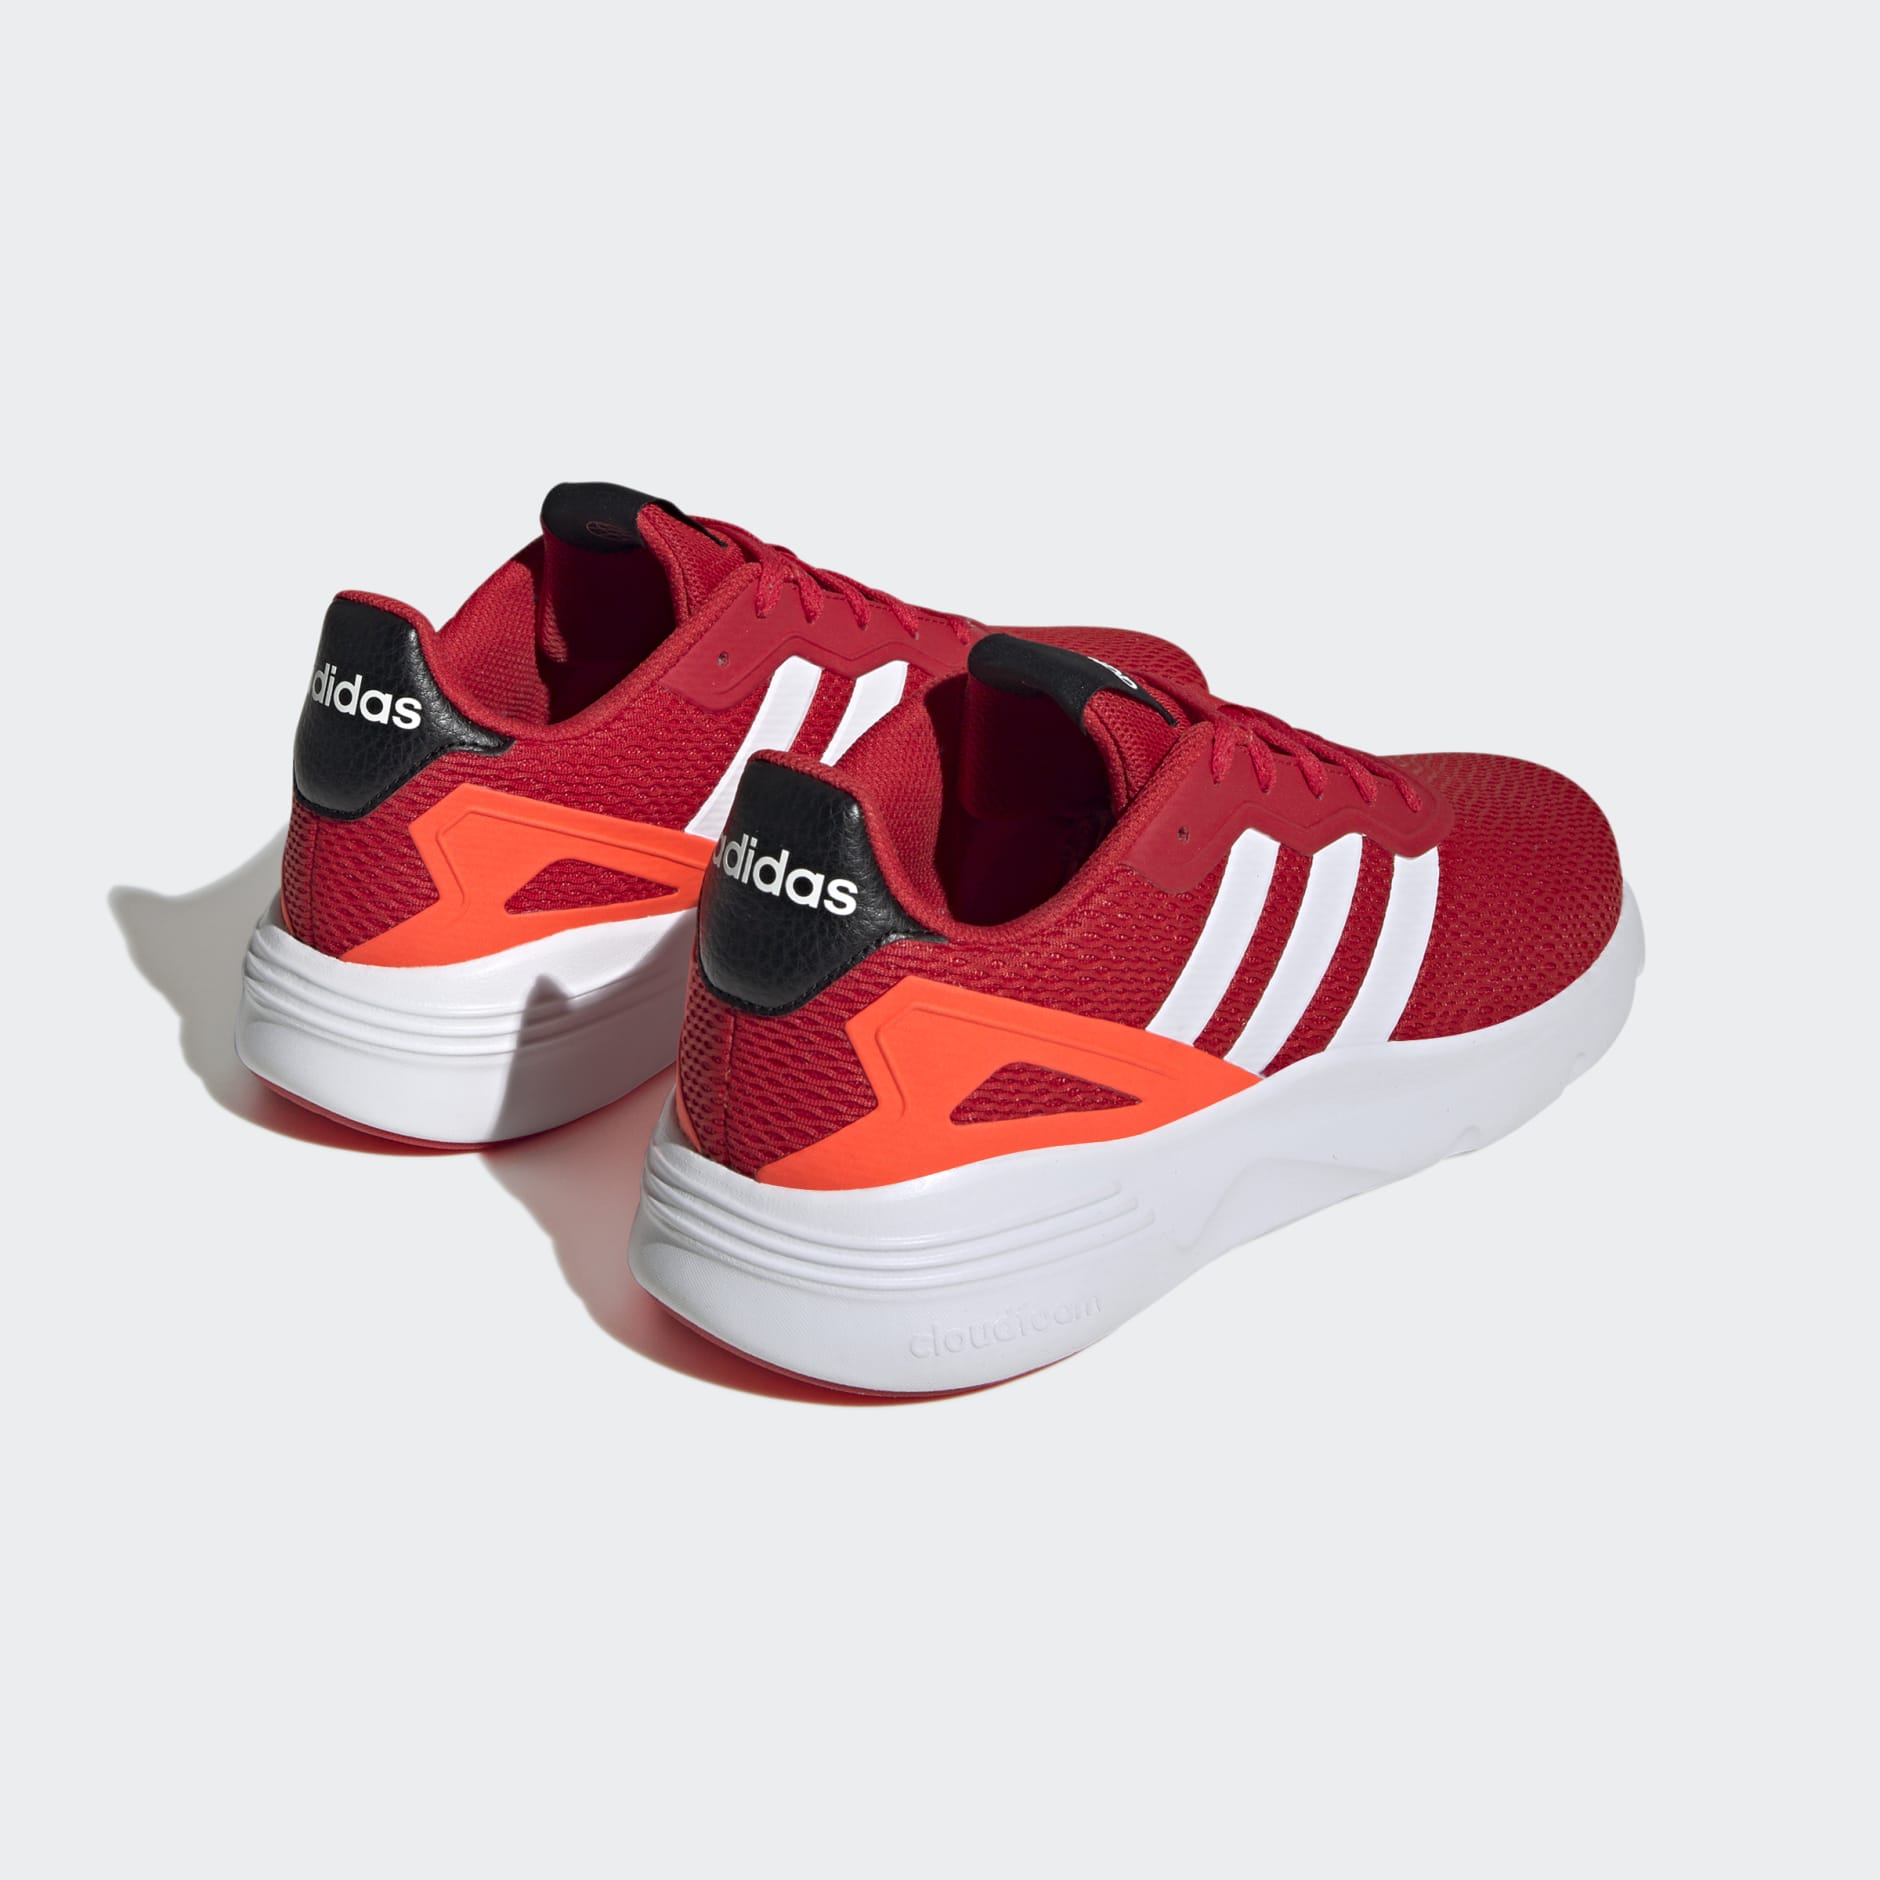 Nebzed Cloudfoam Lifestyle Shoes - Red | adidas